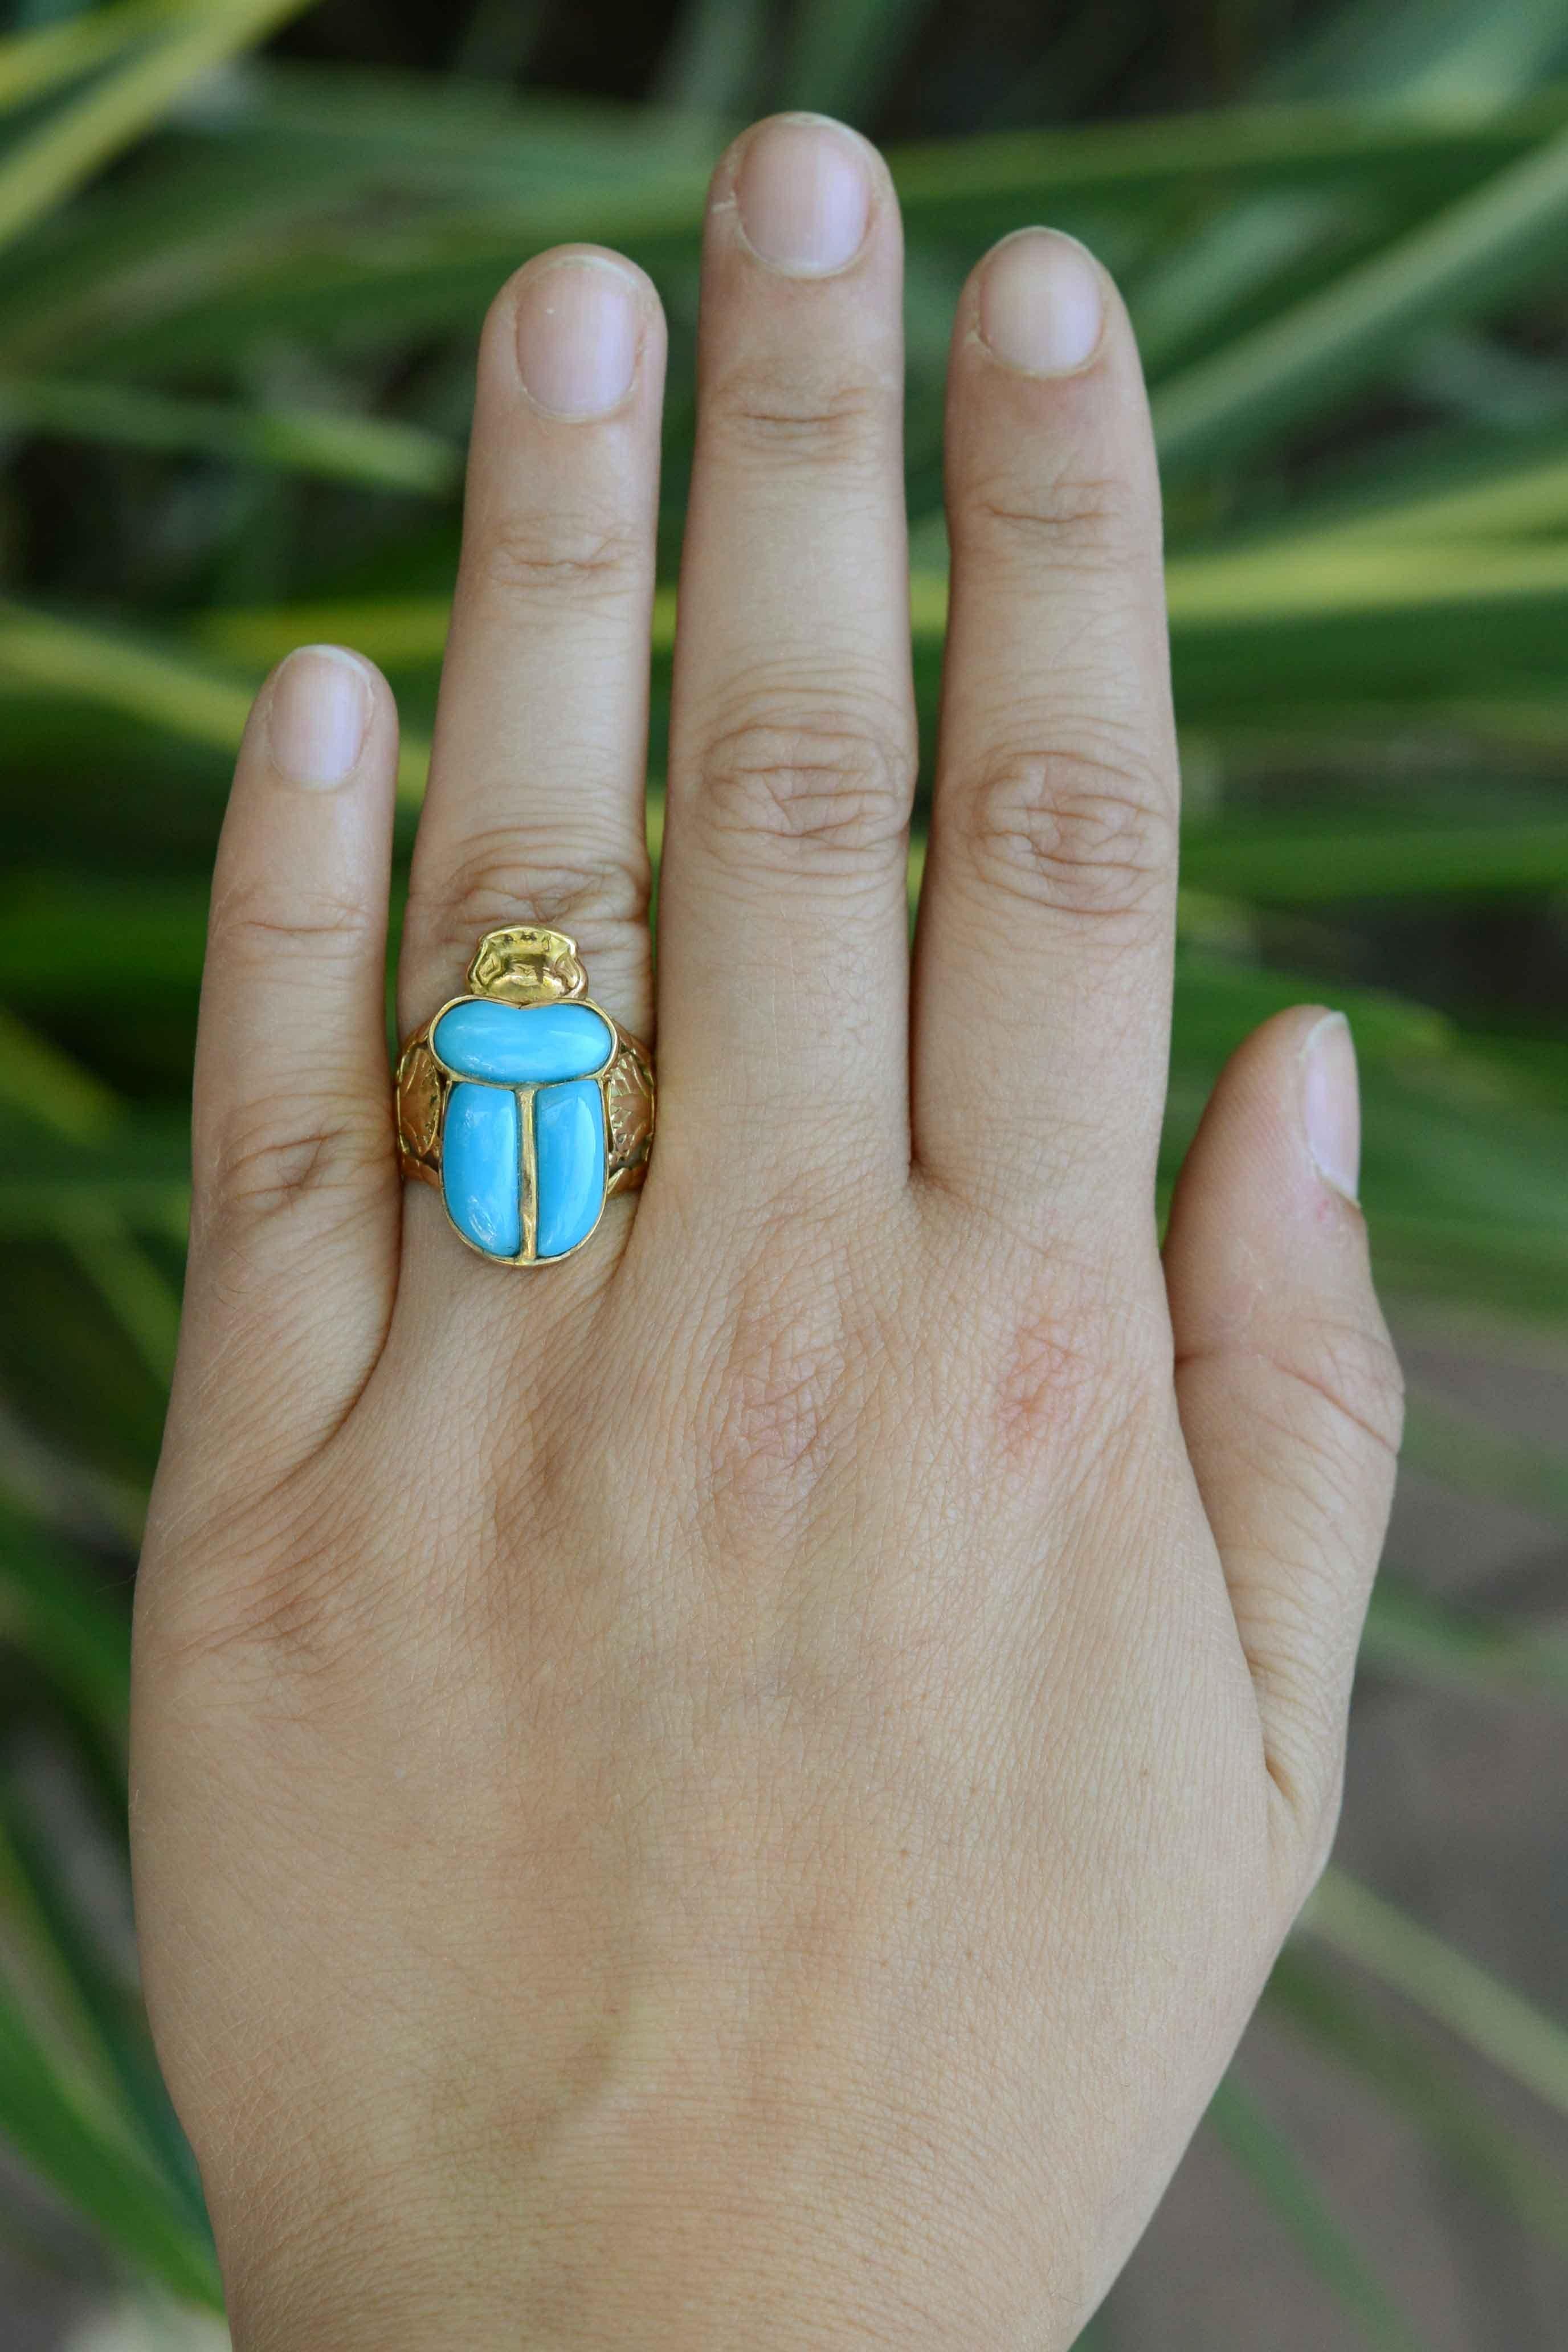 A vibrant and unique Persian turquoise and 18k gold ring. This vintage ring is styled after highly refined ornamental ancient Egyptian jewelry. The finely hand engraved, rich yellow gold marvelously complements the lively turquoise. A truly